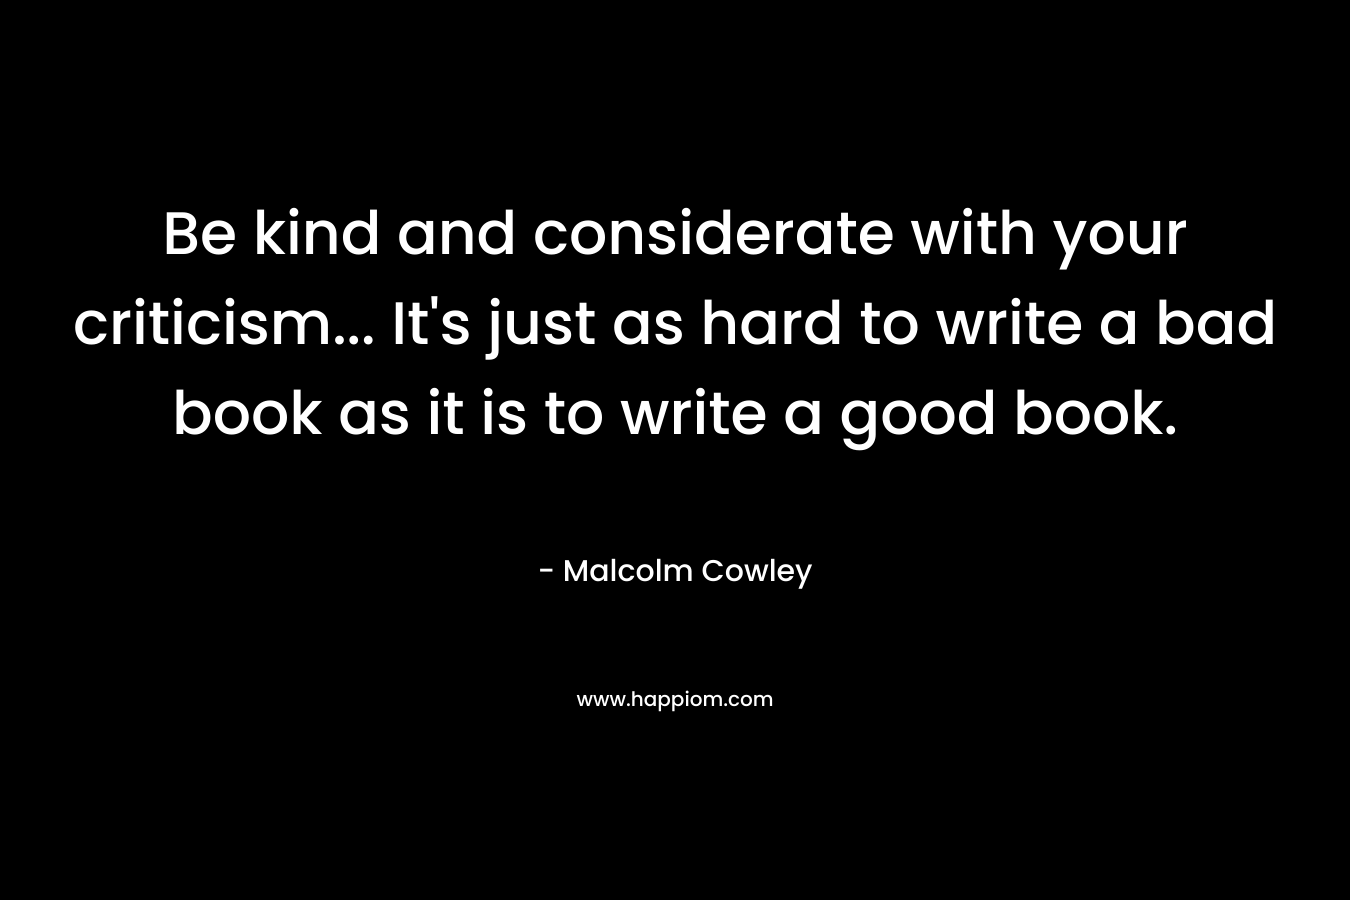 Be kind and considerate with your criticism… It’s just as hard to write a bad book as it is to write a good book. – Malcolm Cowley